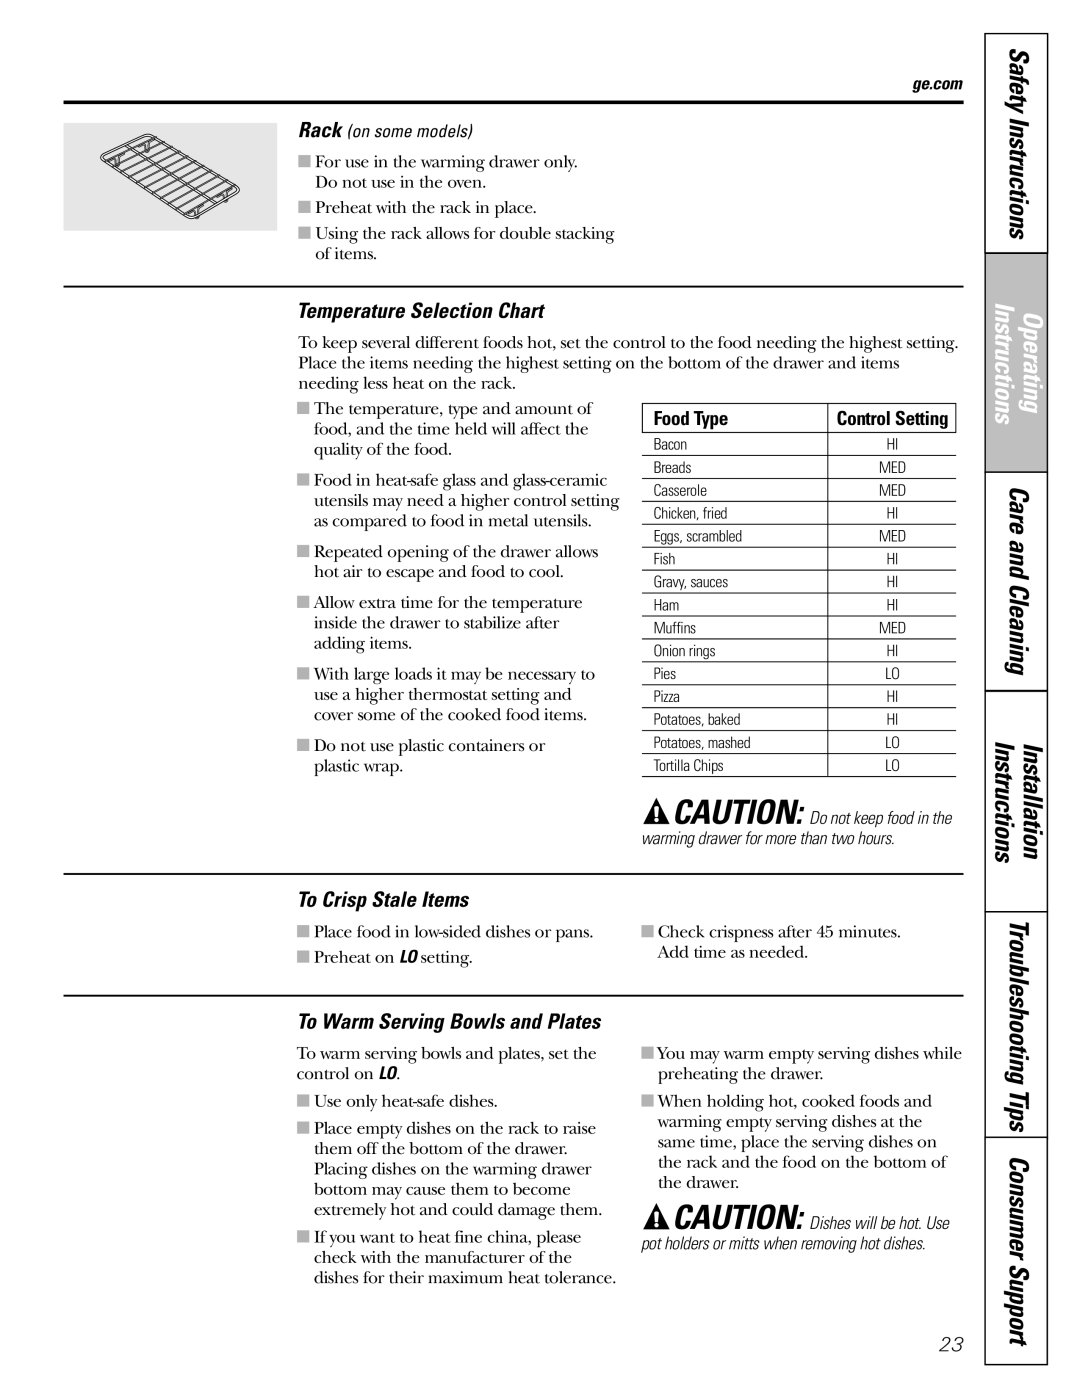 Hotpoint JB600 Tips Consumer Support, Temperature Selection Chart, To Crisp Stale Items, Food Type, Safety Instructions 